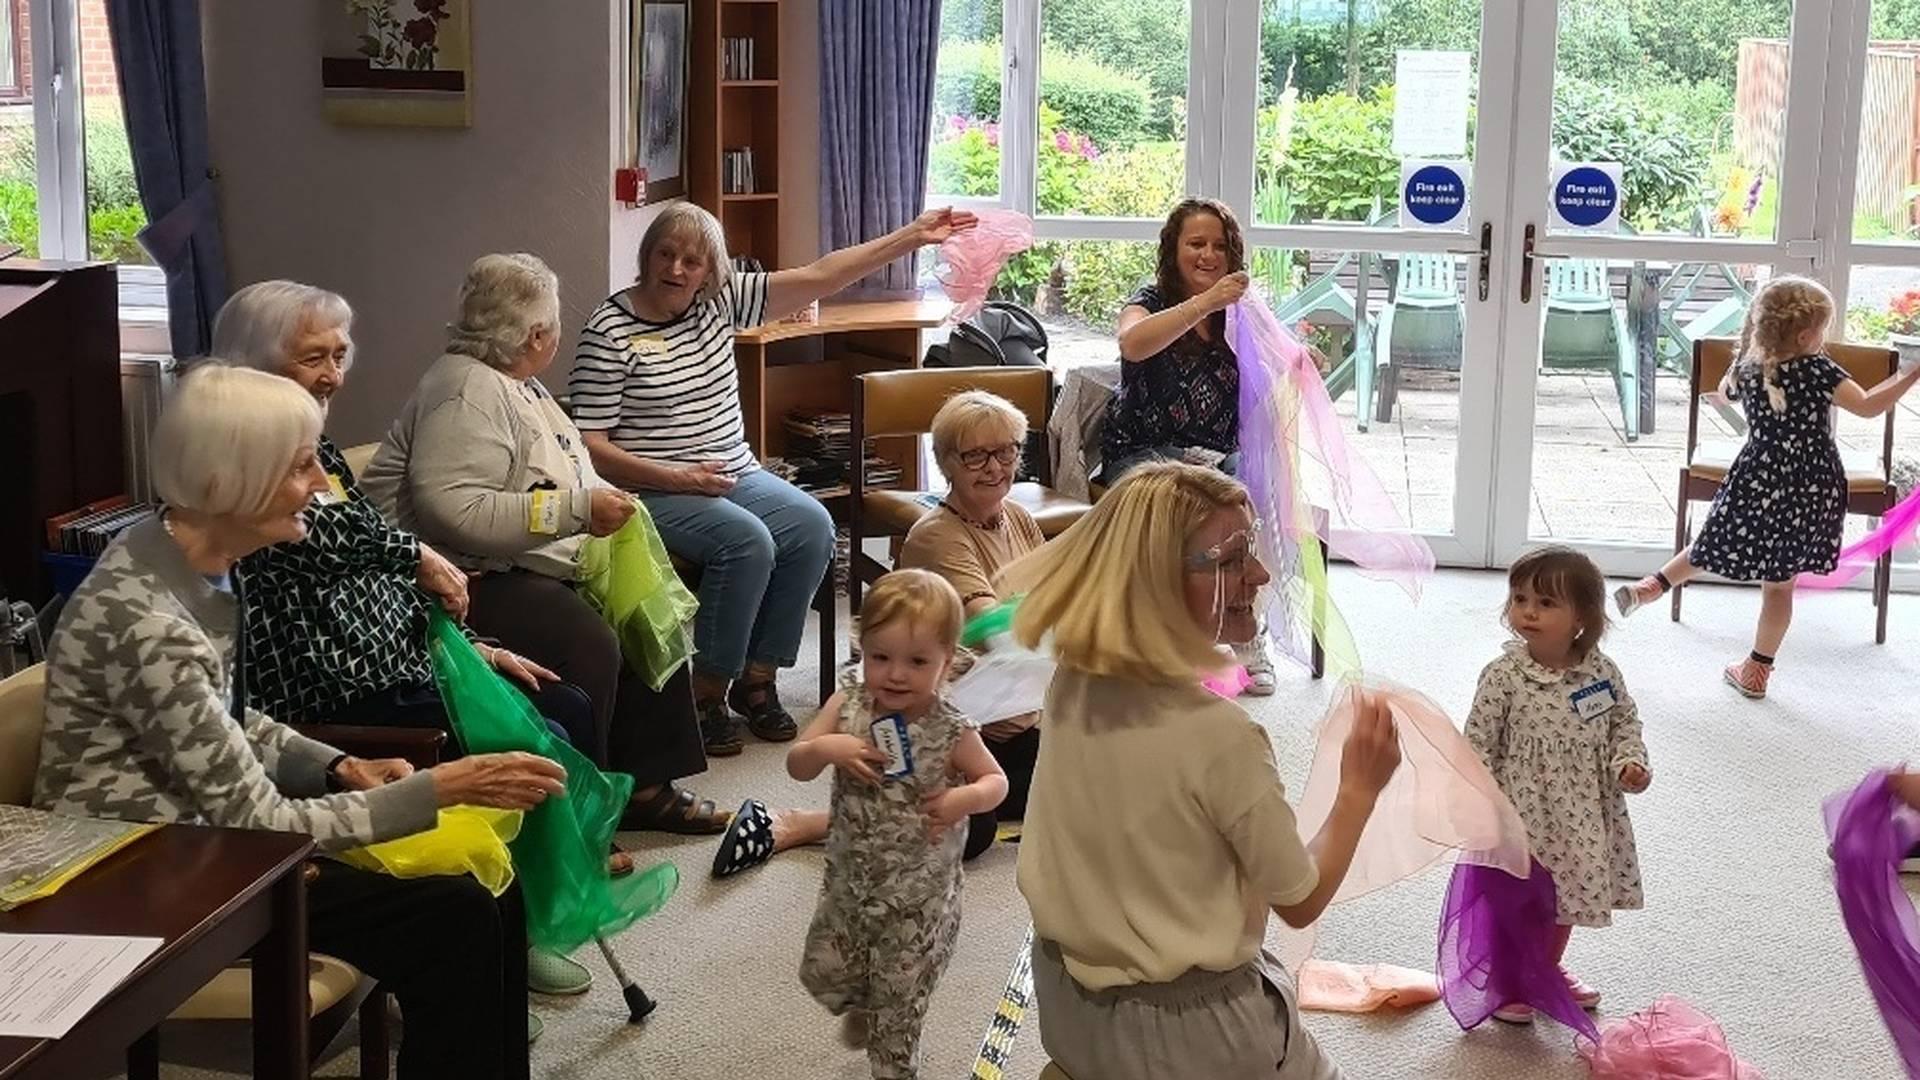 Songs & Smiles - Holme Lea Care Home, Stalybridge - Booking required photo